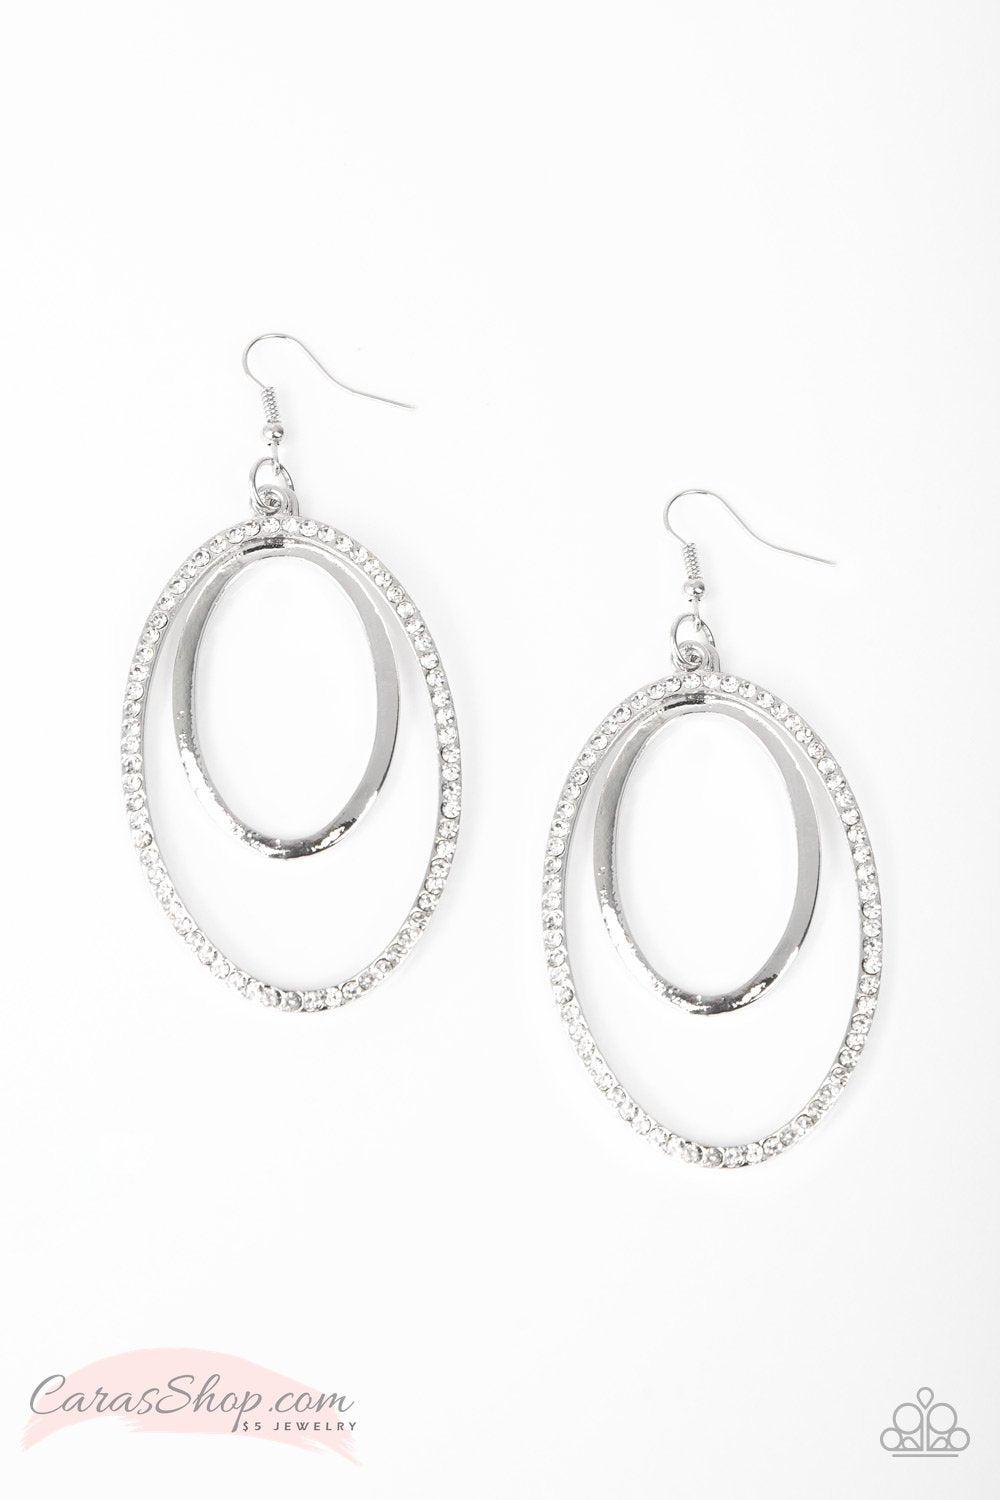 Wrapped In Wealth - Silver and White Rhinestone Earrings - Paparazzi Accessories-CarasShop.com - $5 Jewelry by Cara Jewels